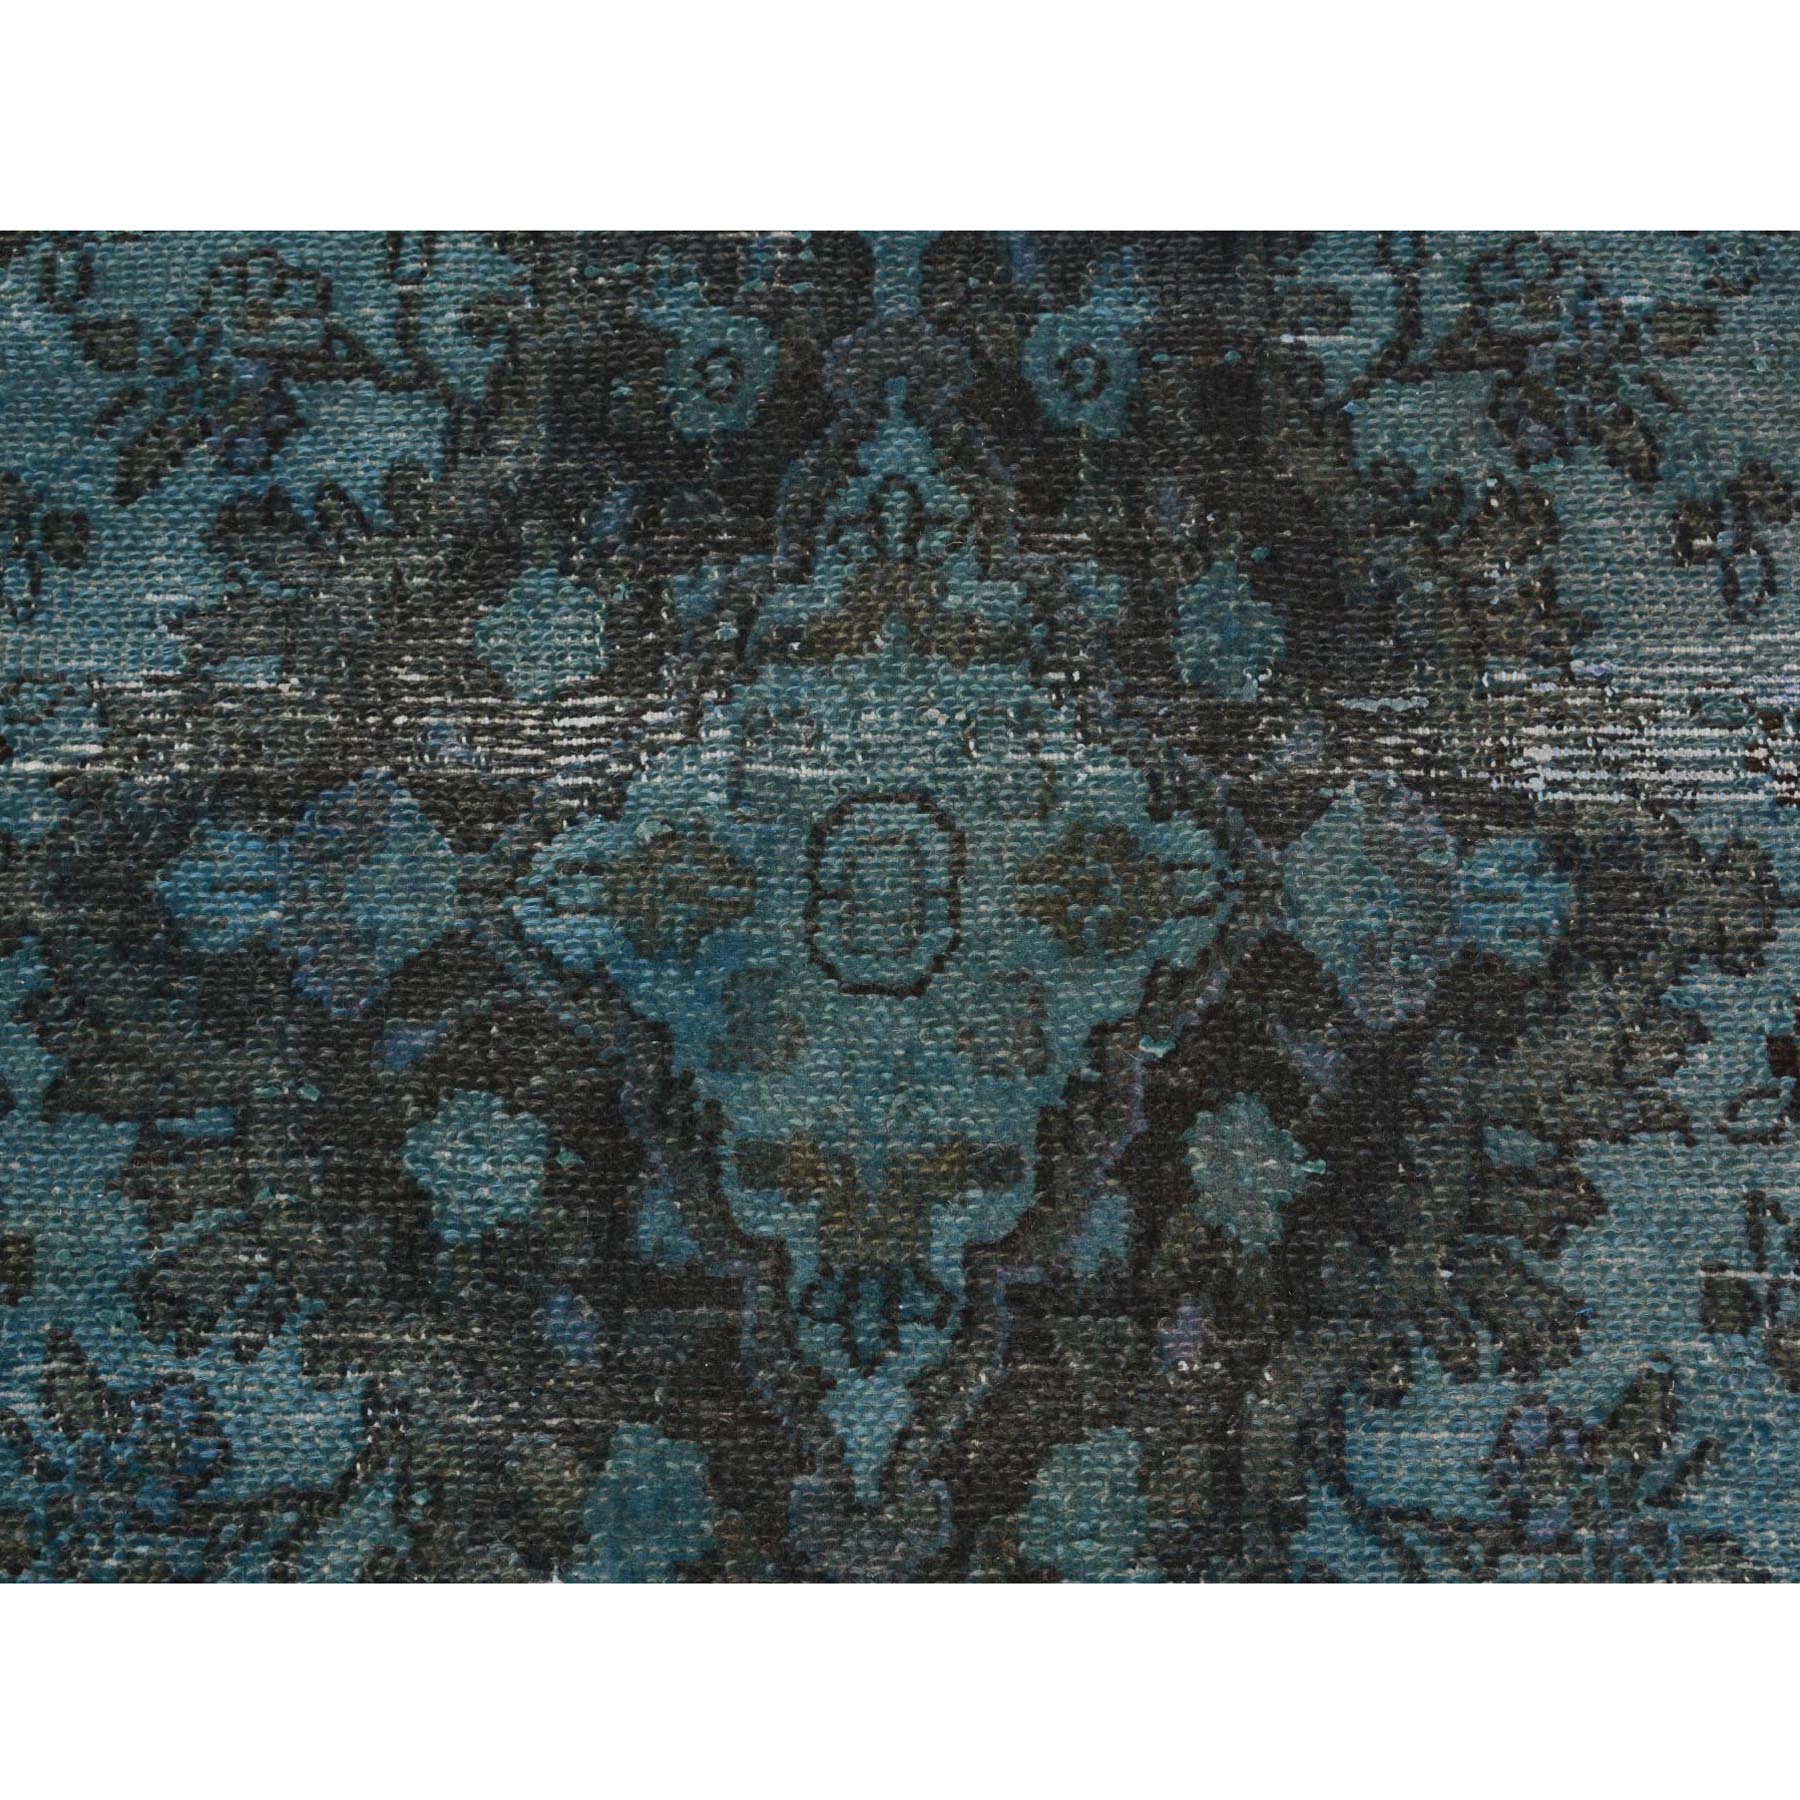 6-5 x9-6  Teal Overdyed Vintage and Worn Down Persian Hamadan Hand Knotted Pure Wool Oriental Rug 